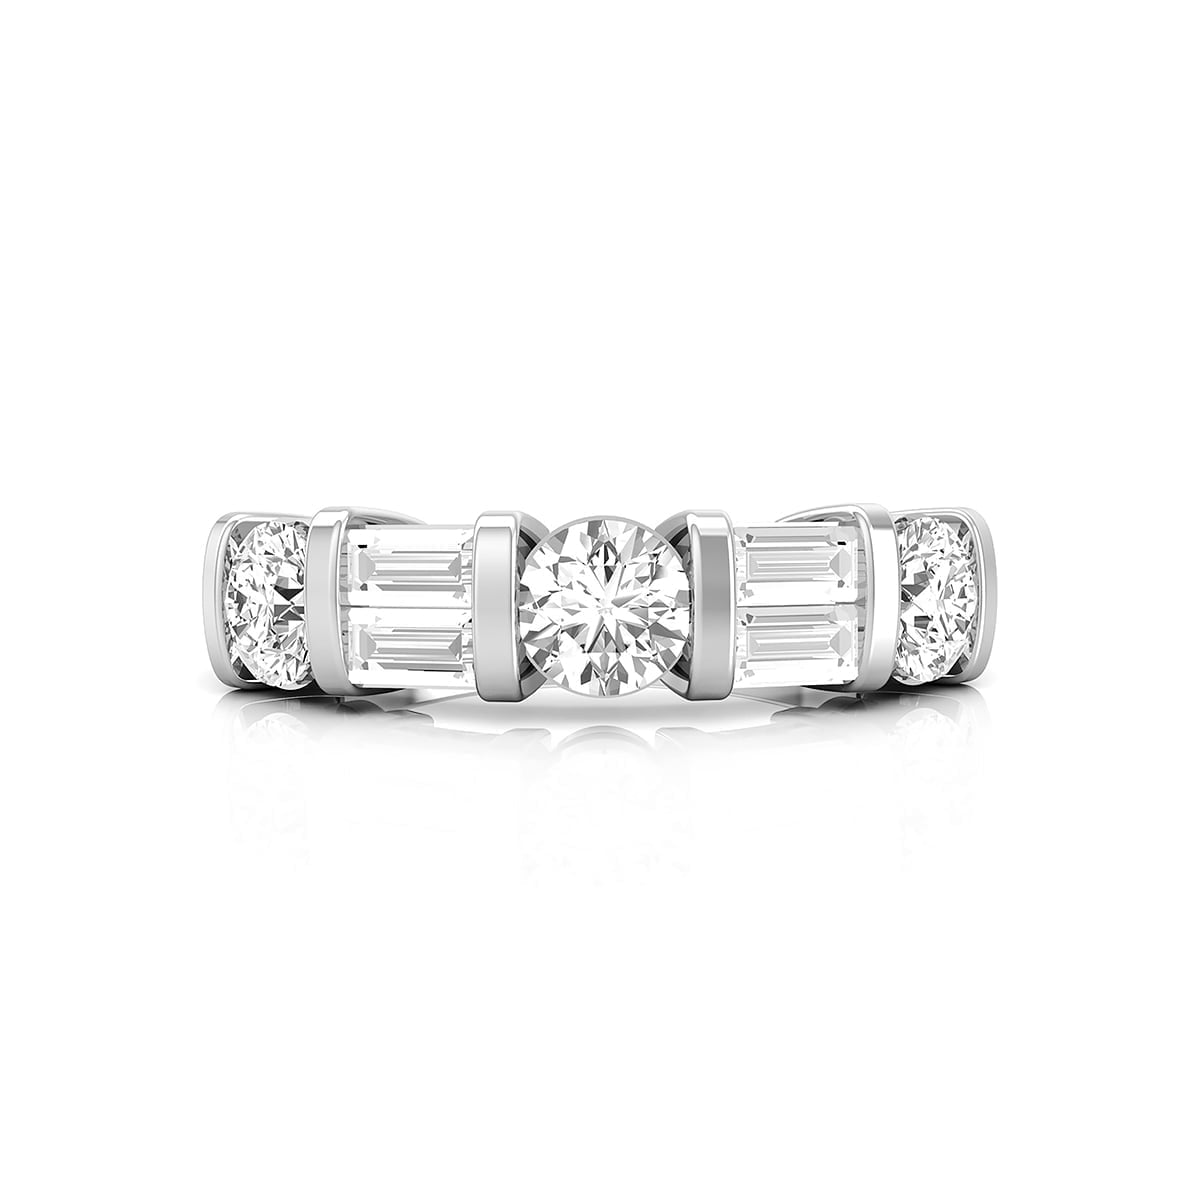 Bar Set & Tension Set Round Or Baguette Cut CZ Seven Stone Engagement Ring For Women Or Girl ( 1 5/7 TCW)